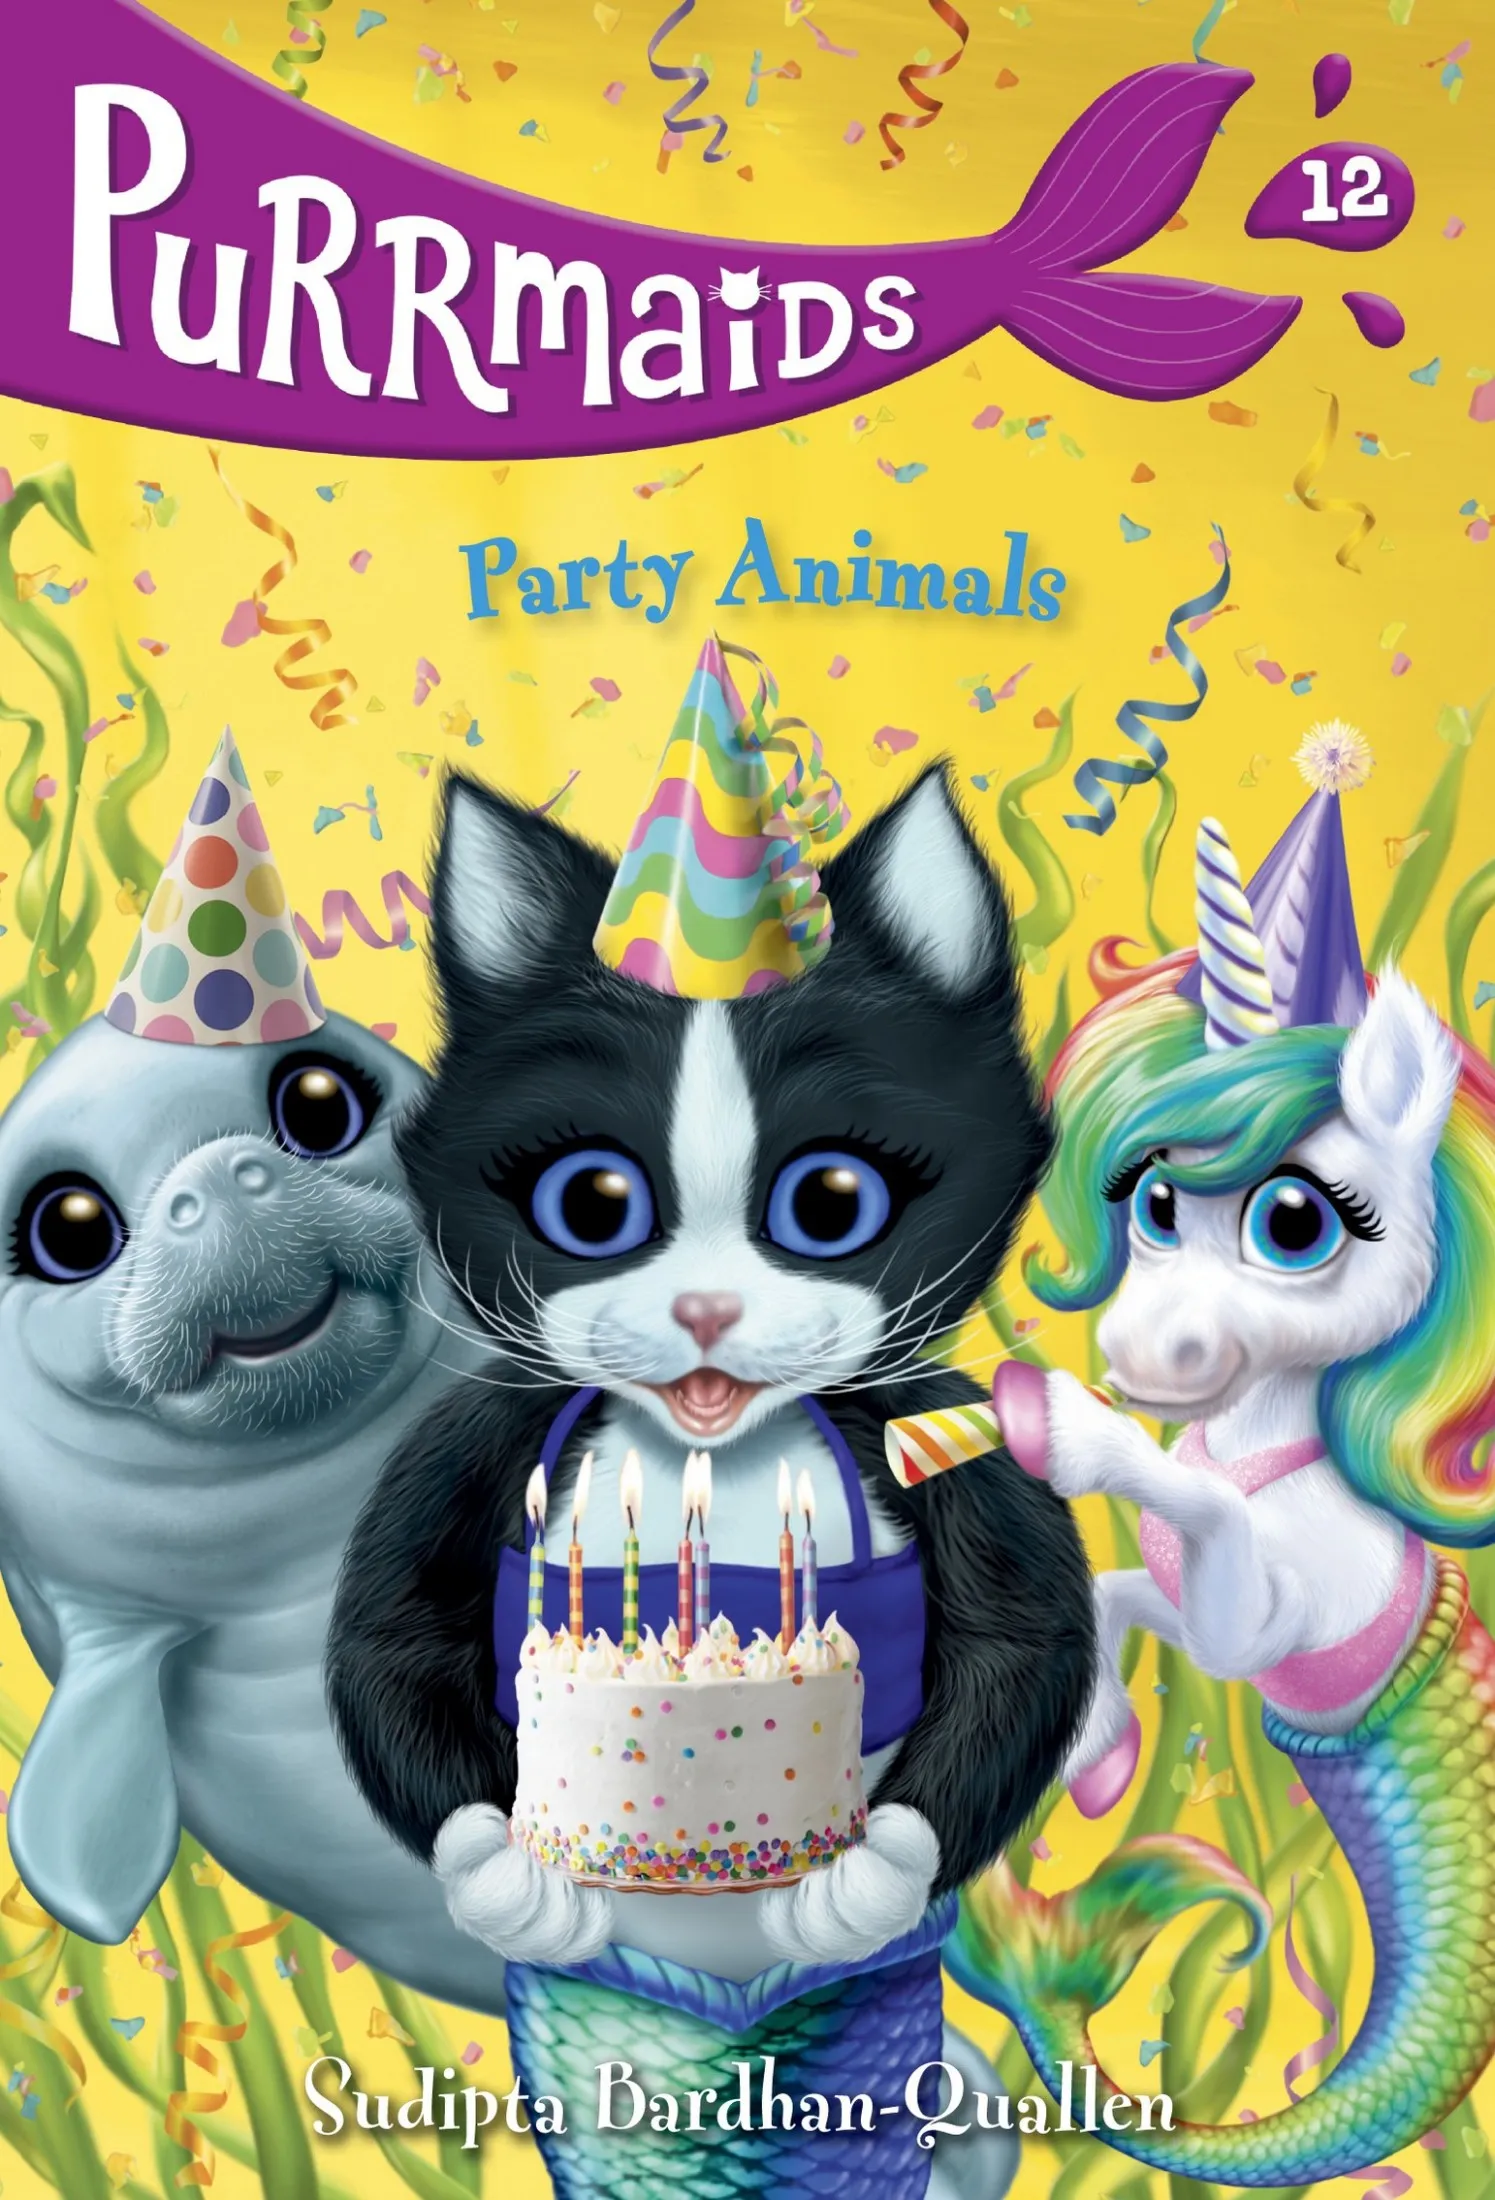 Party Animals (Purrmaids #12)